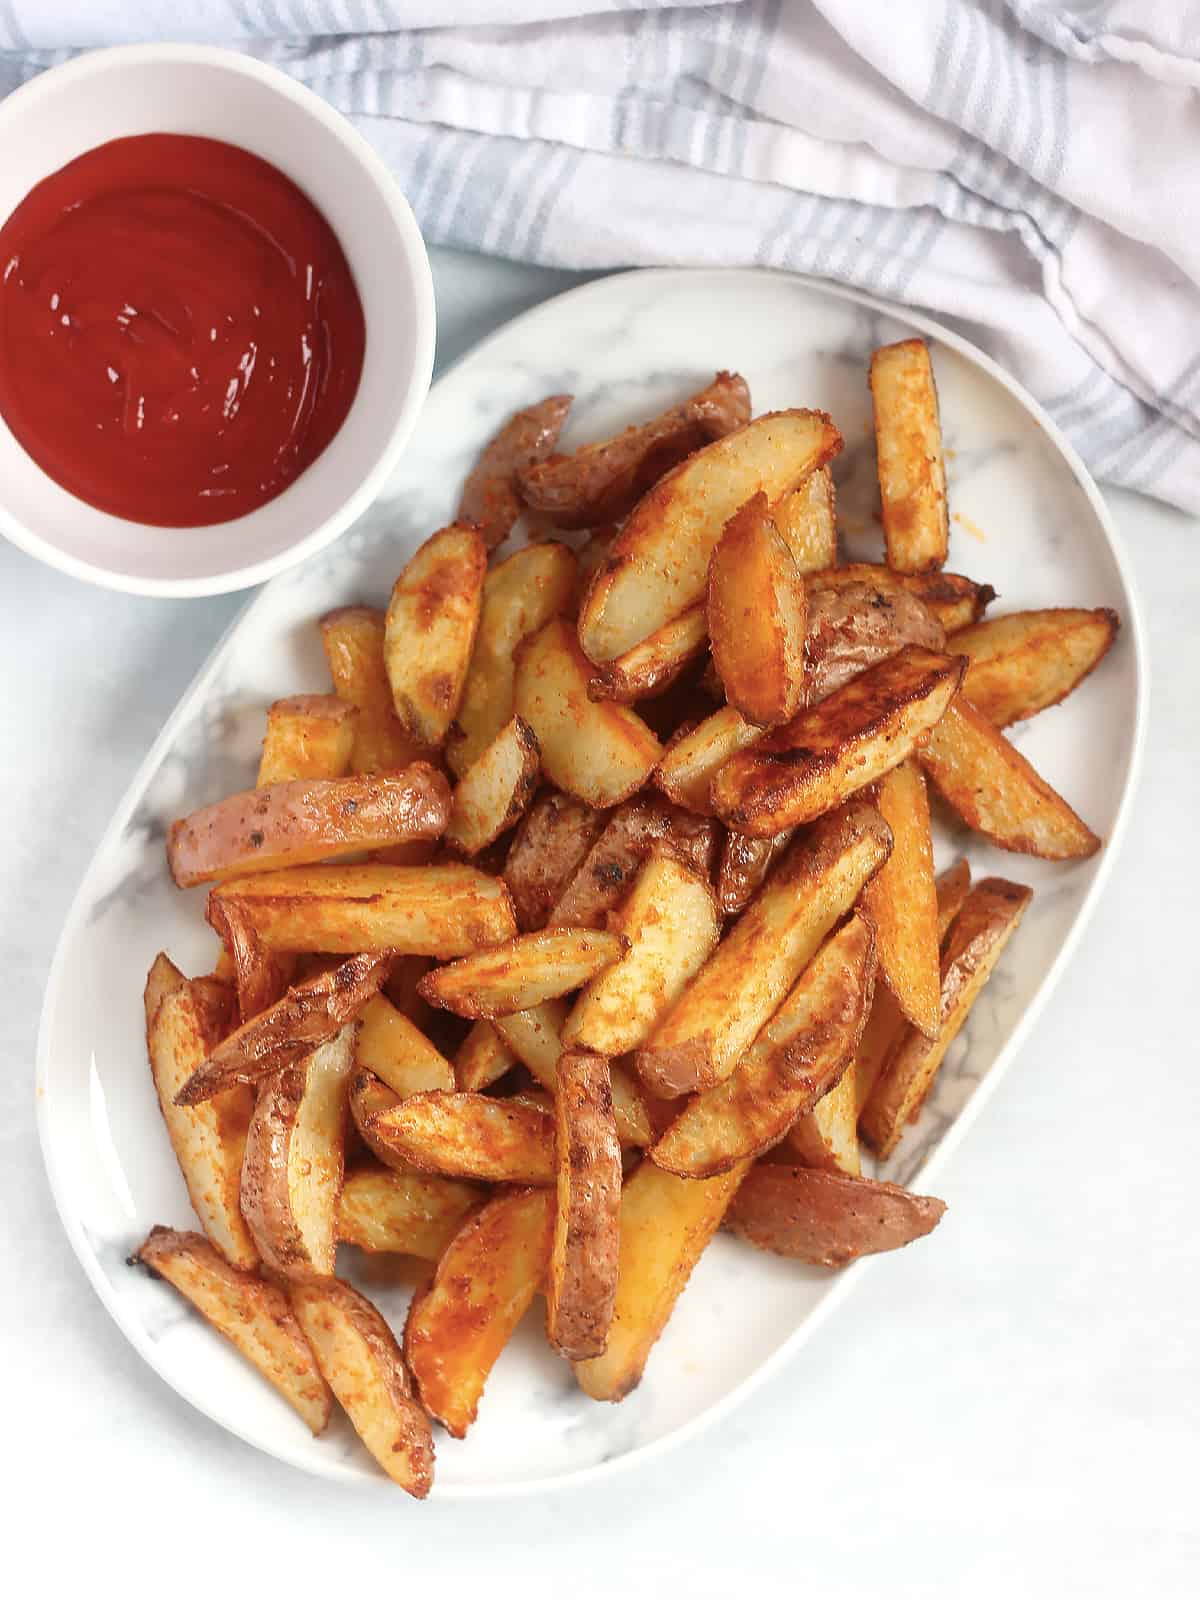 Red skinned potato fries served on a plate next to a pot of tomato ketchup.